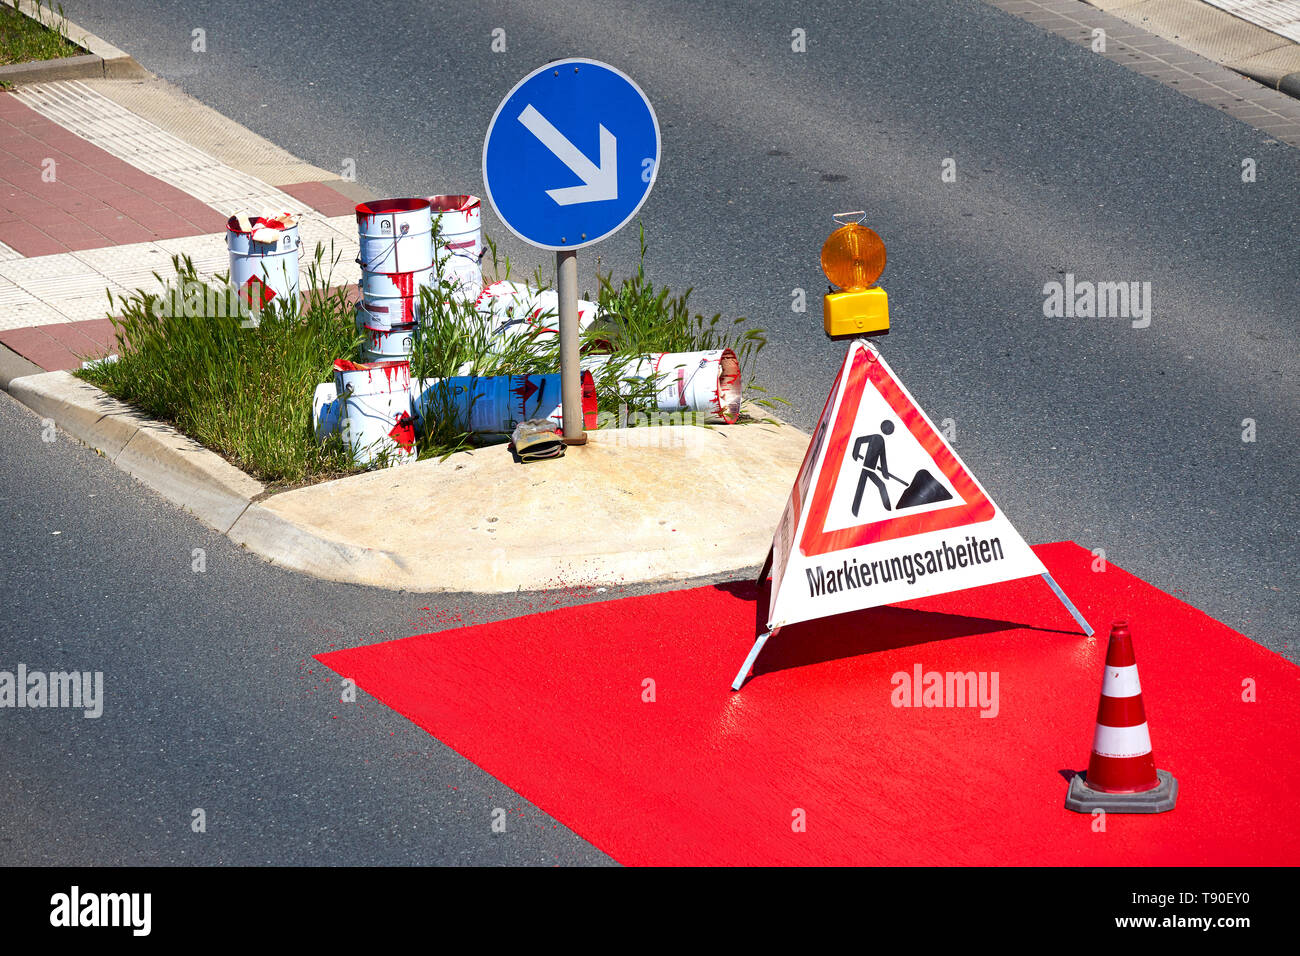 Workers carrying out marking work on a road that is marked with red paint Stock Photo